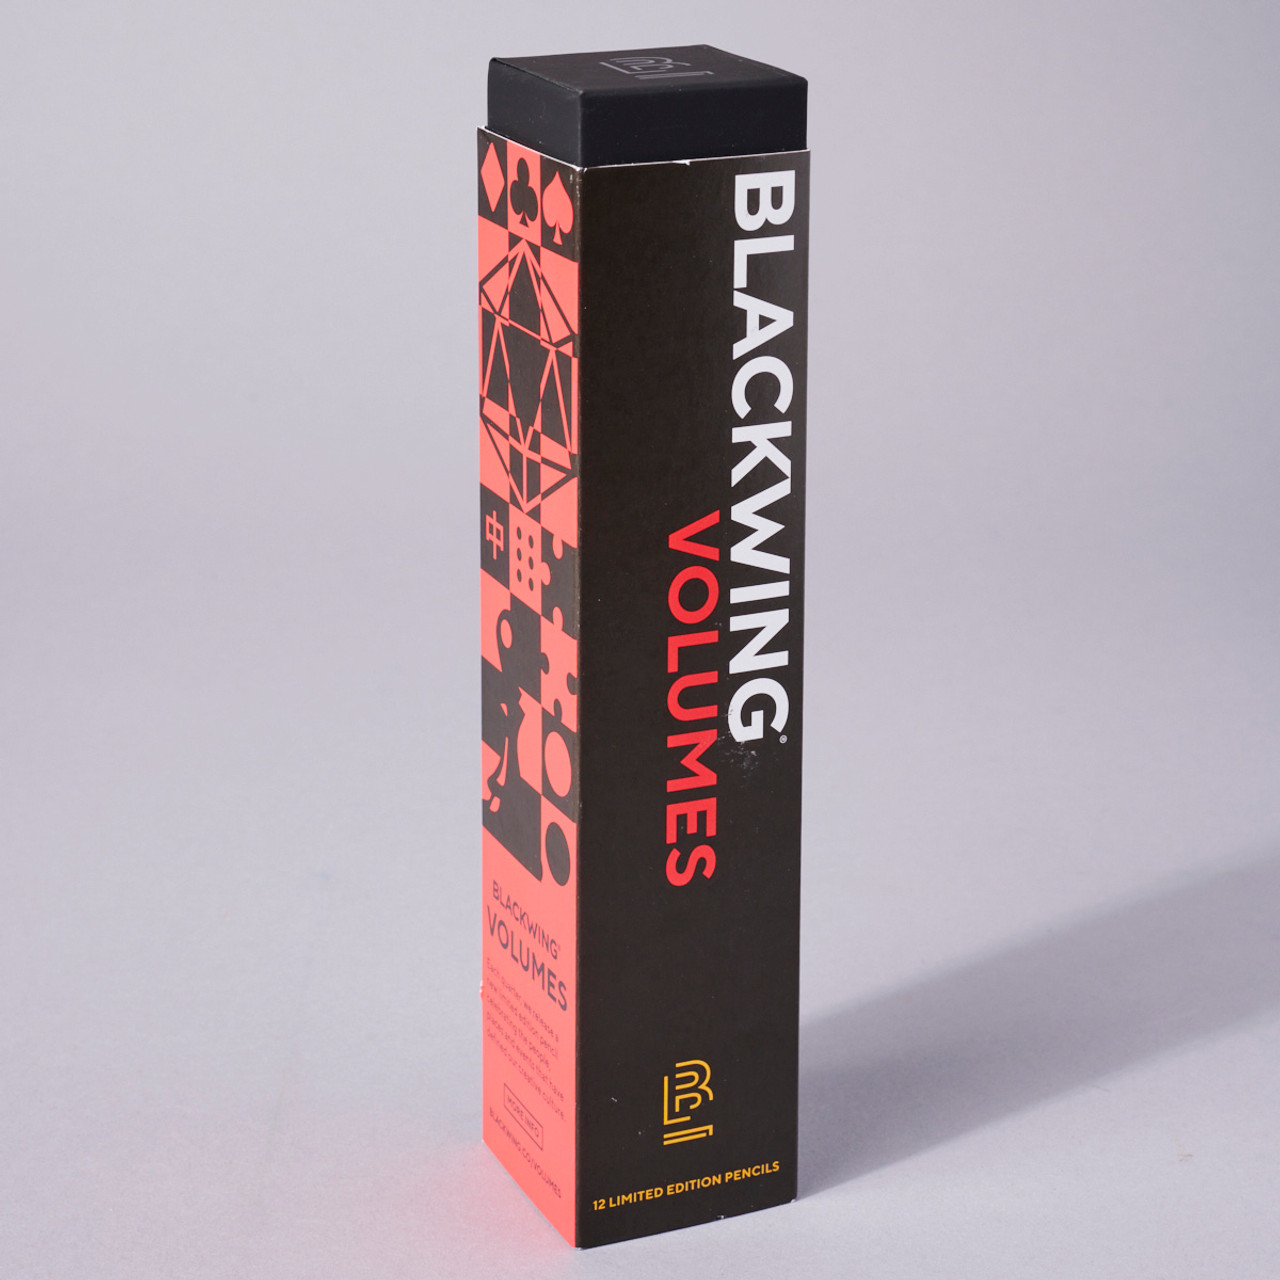 Blackwing Volume 20 Limited Edition Pencils - Firm - Box of 12